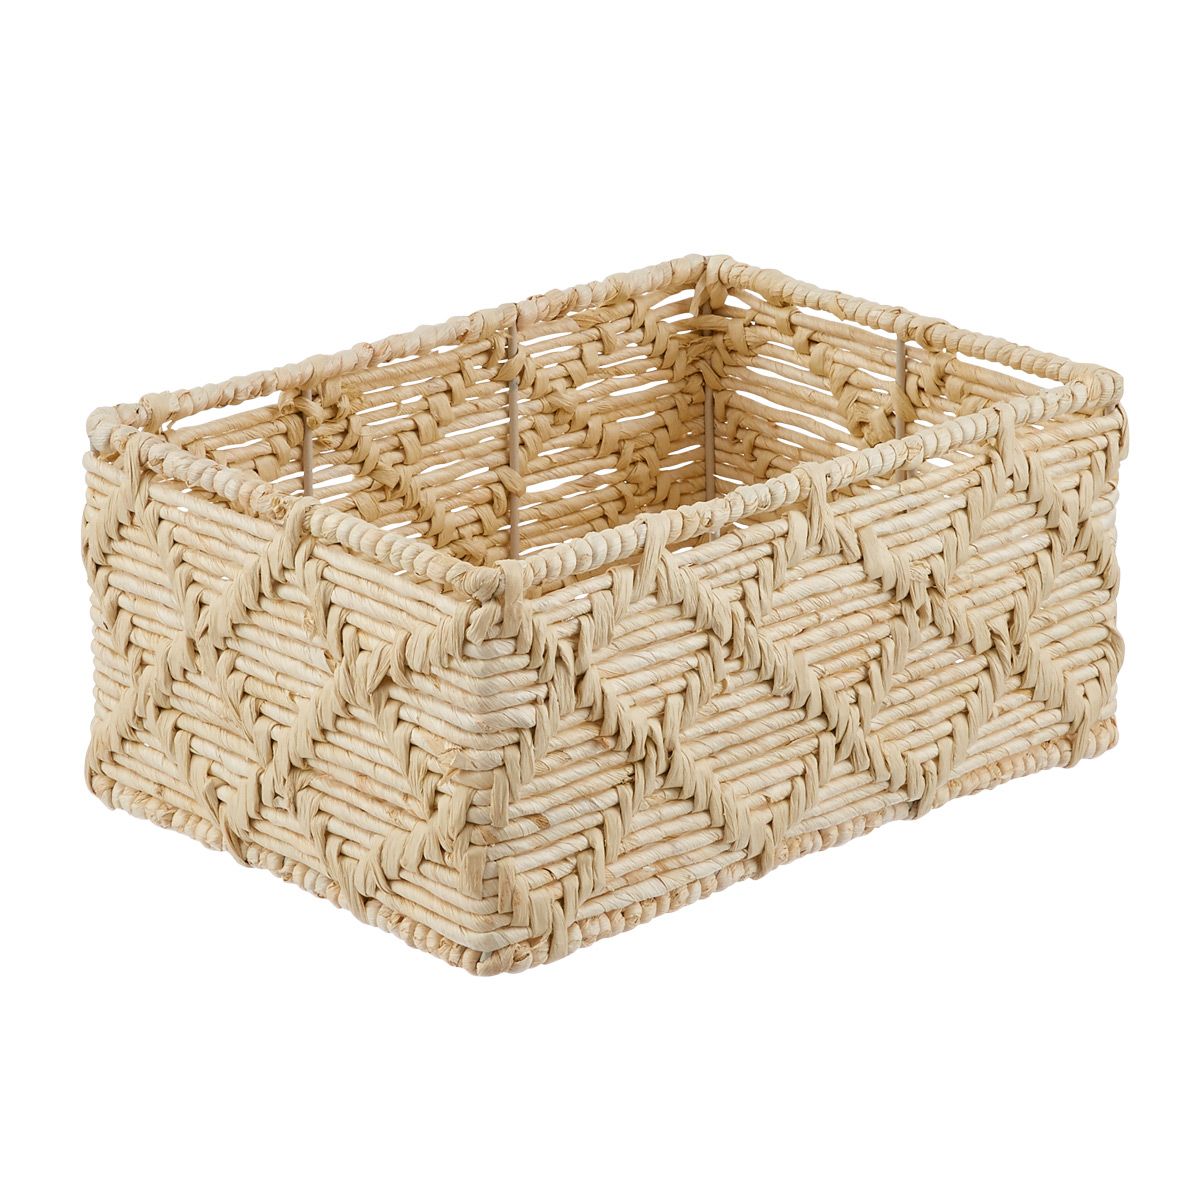 Trellis Maize Storage Bins | The Container Store